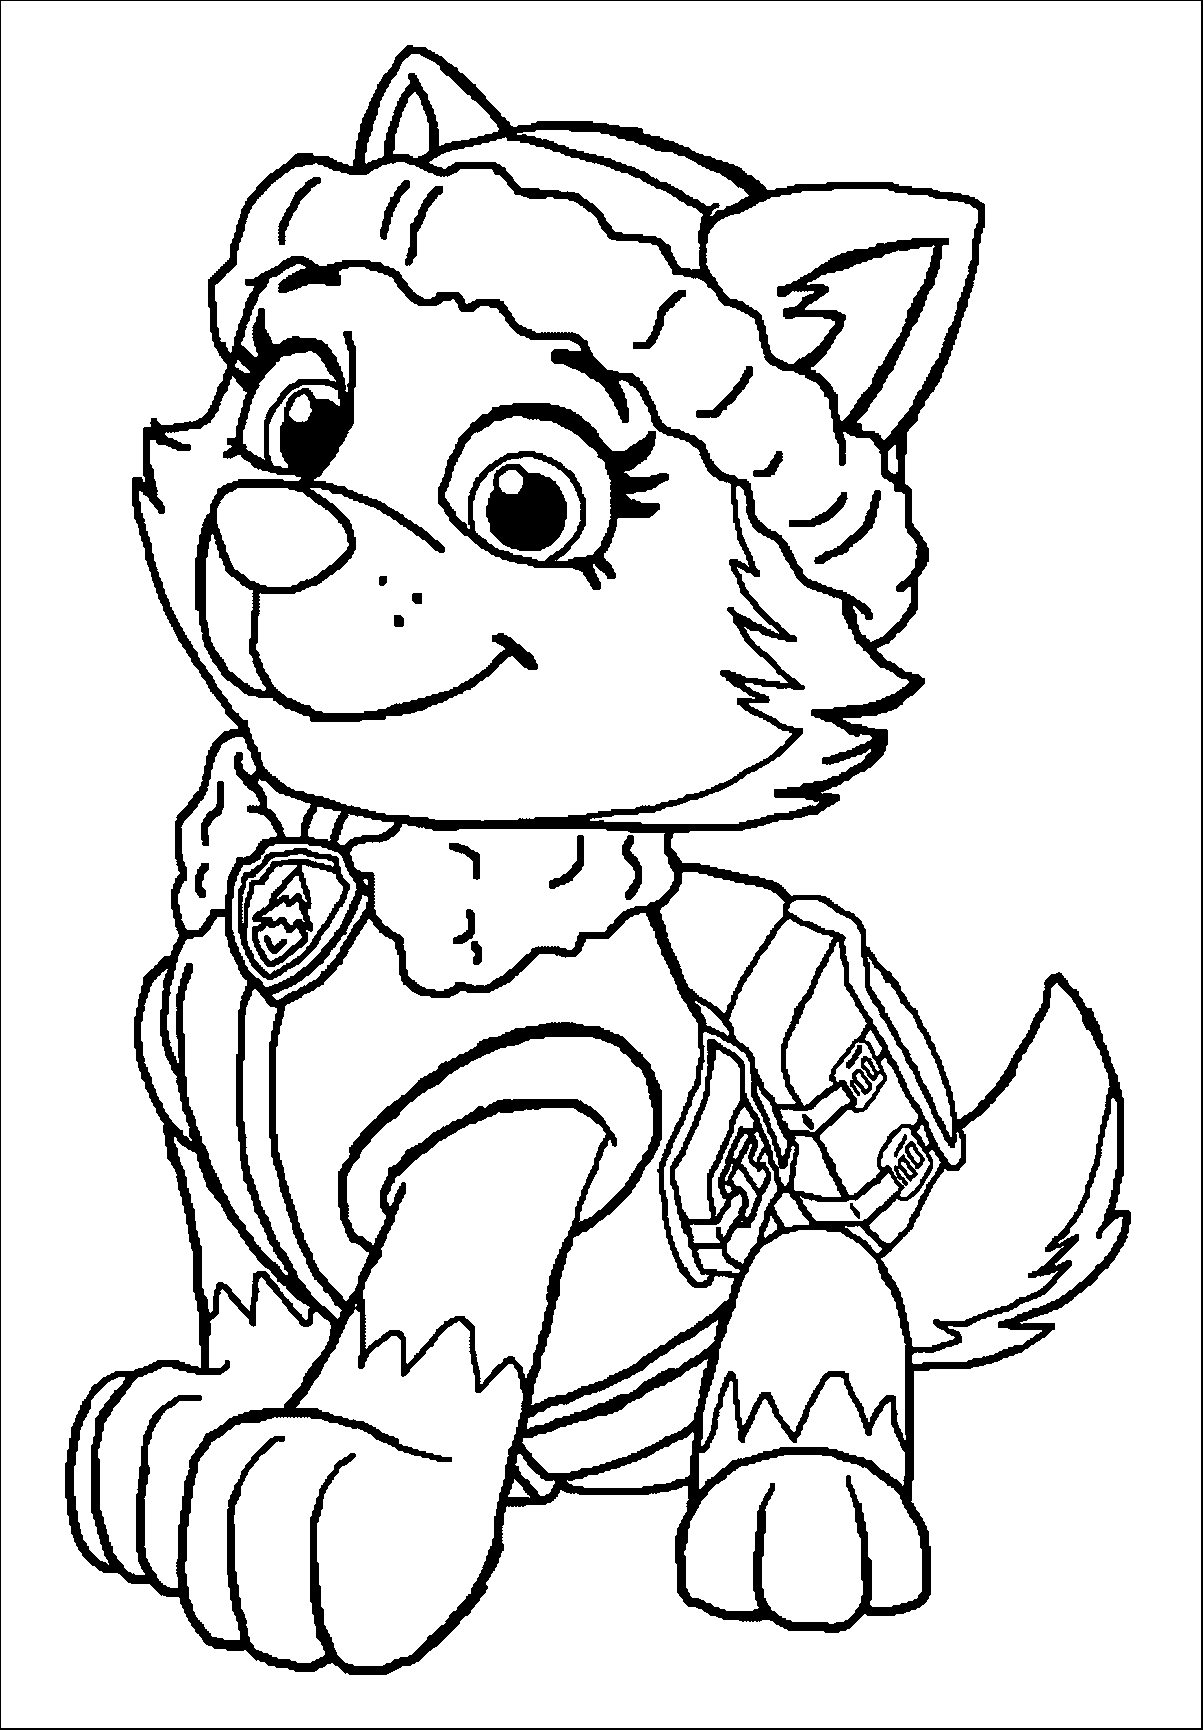 paw-patrol-coloring-pages-best-coloring-pages-for-kids